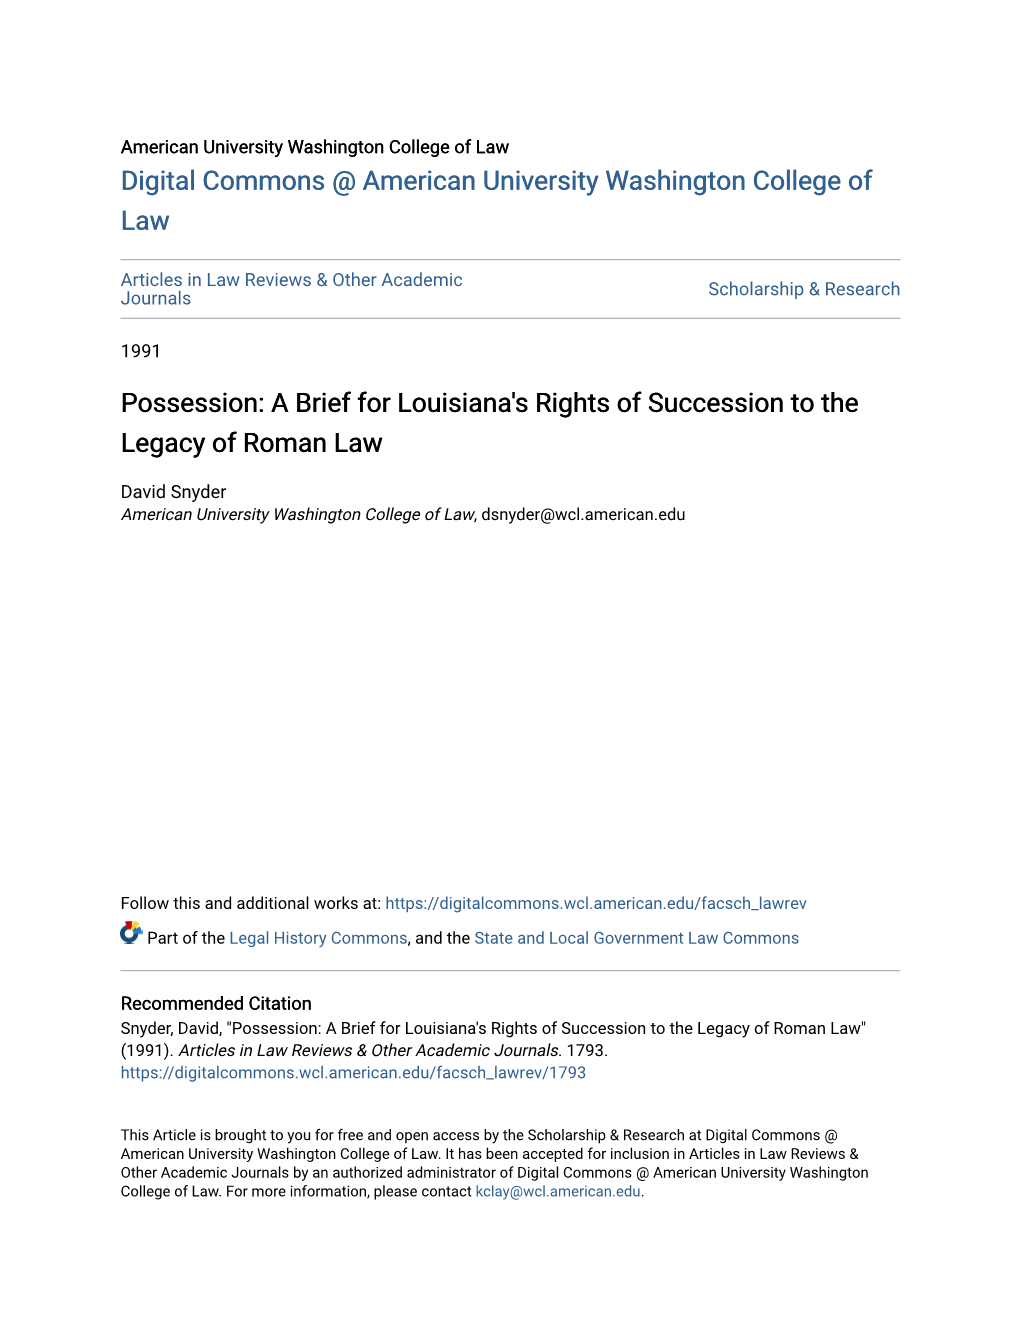 Possession: a Brief for Louisiana's Rights of Succession to the Legacy of Roman Law